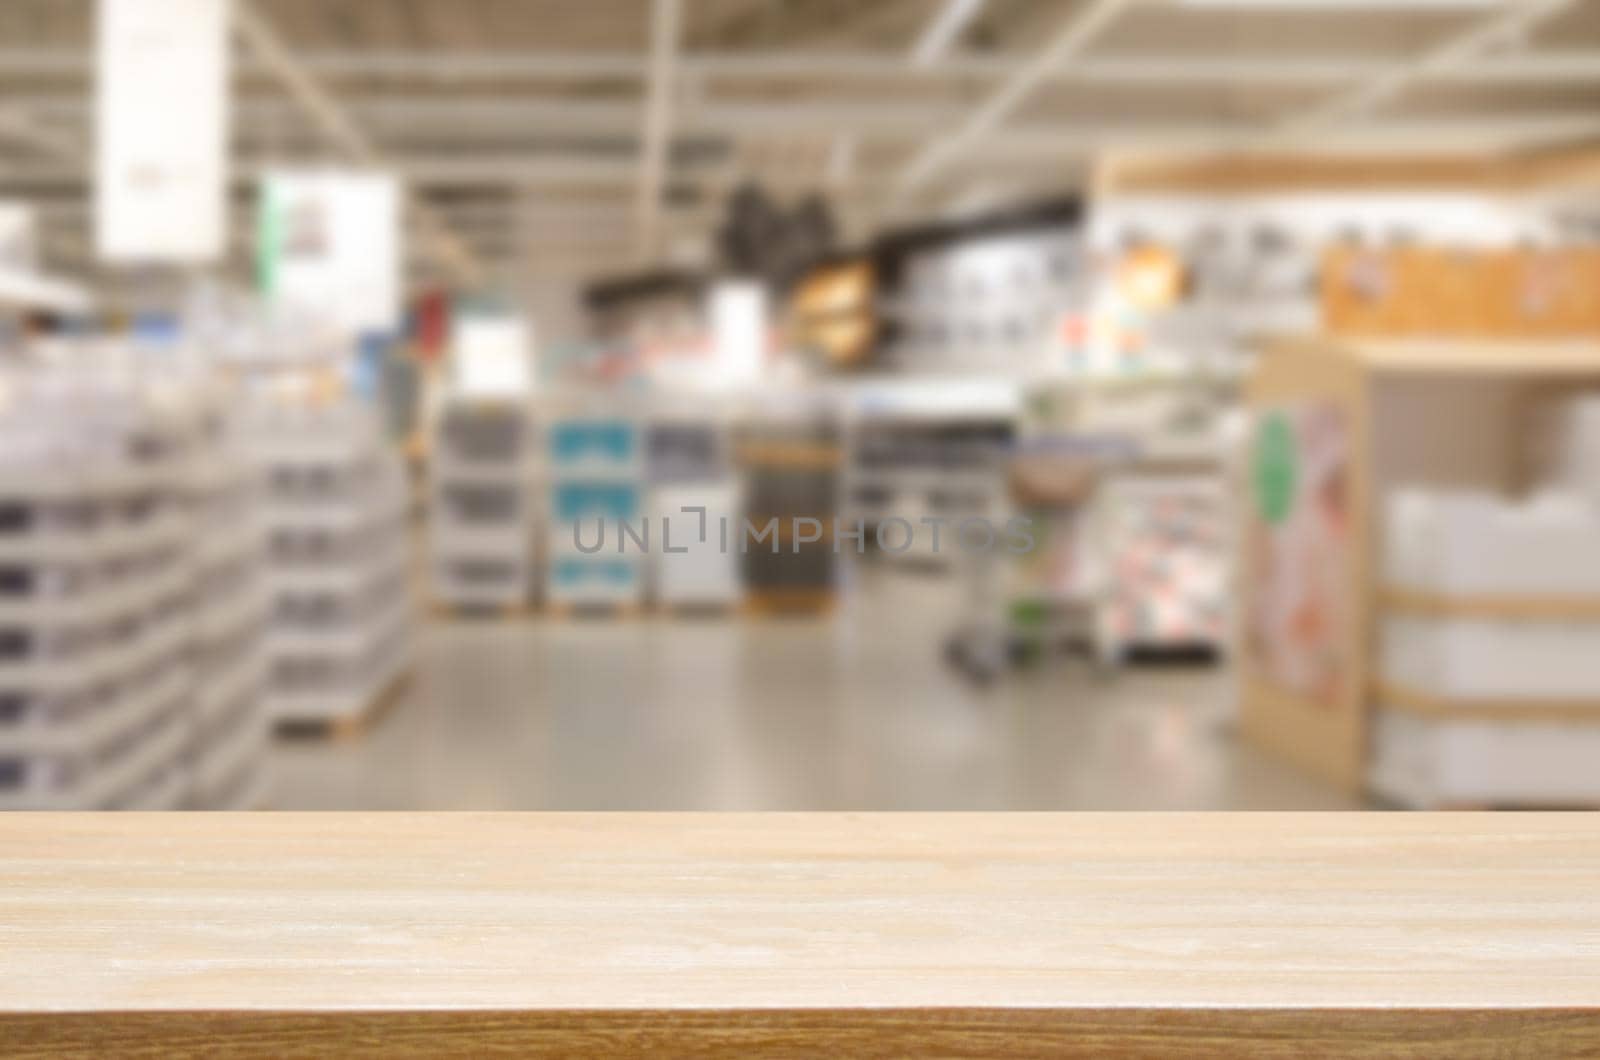 wood table top shelf product counter blank good blur background shopping mall business display.